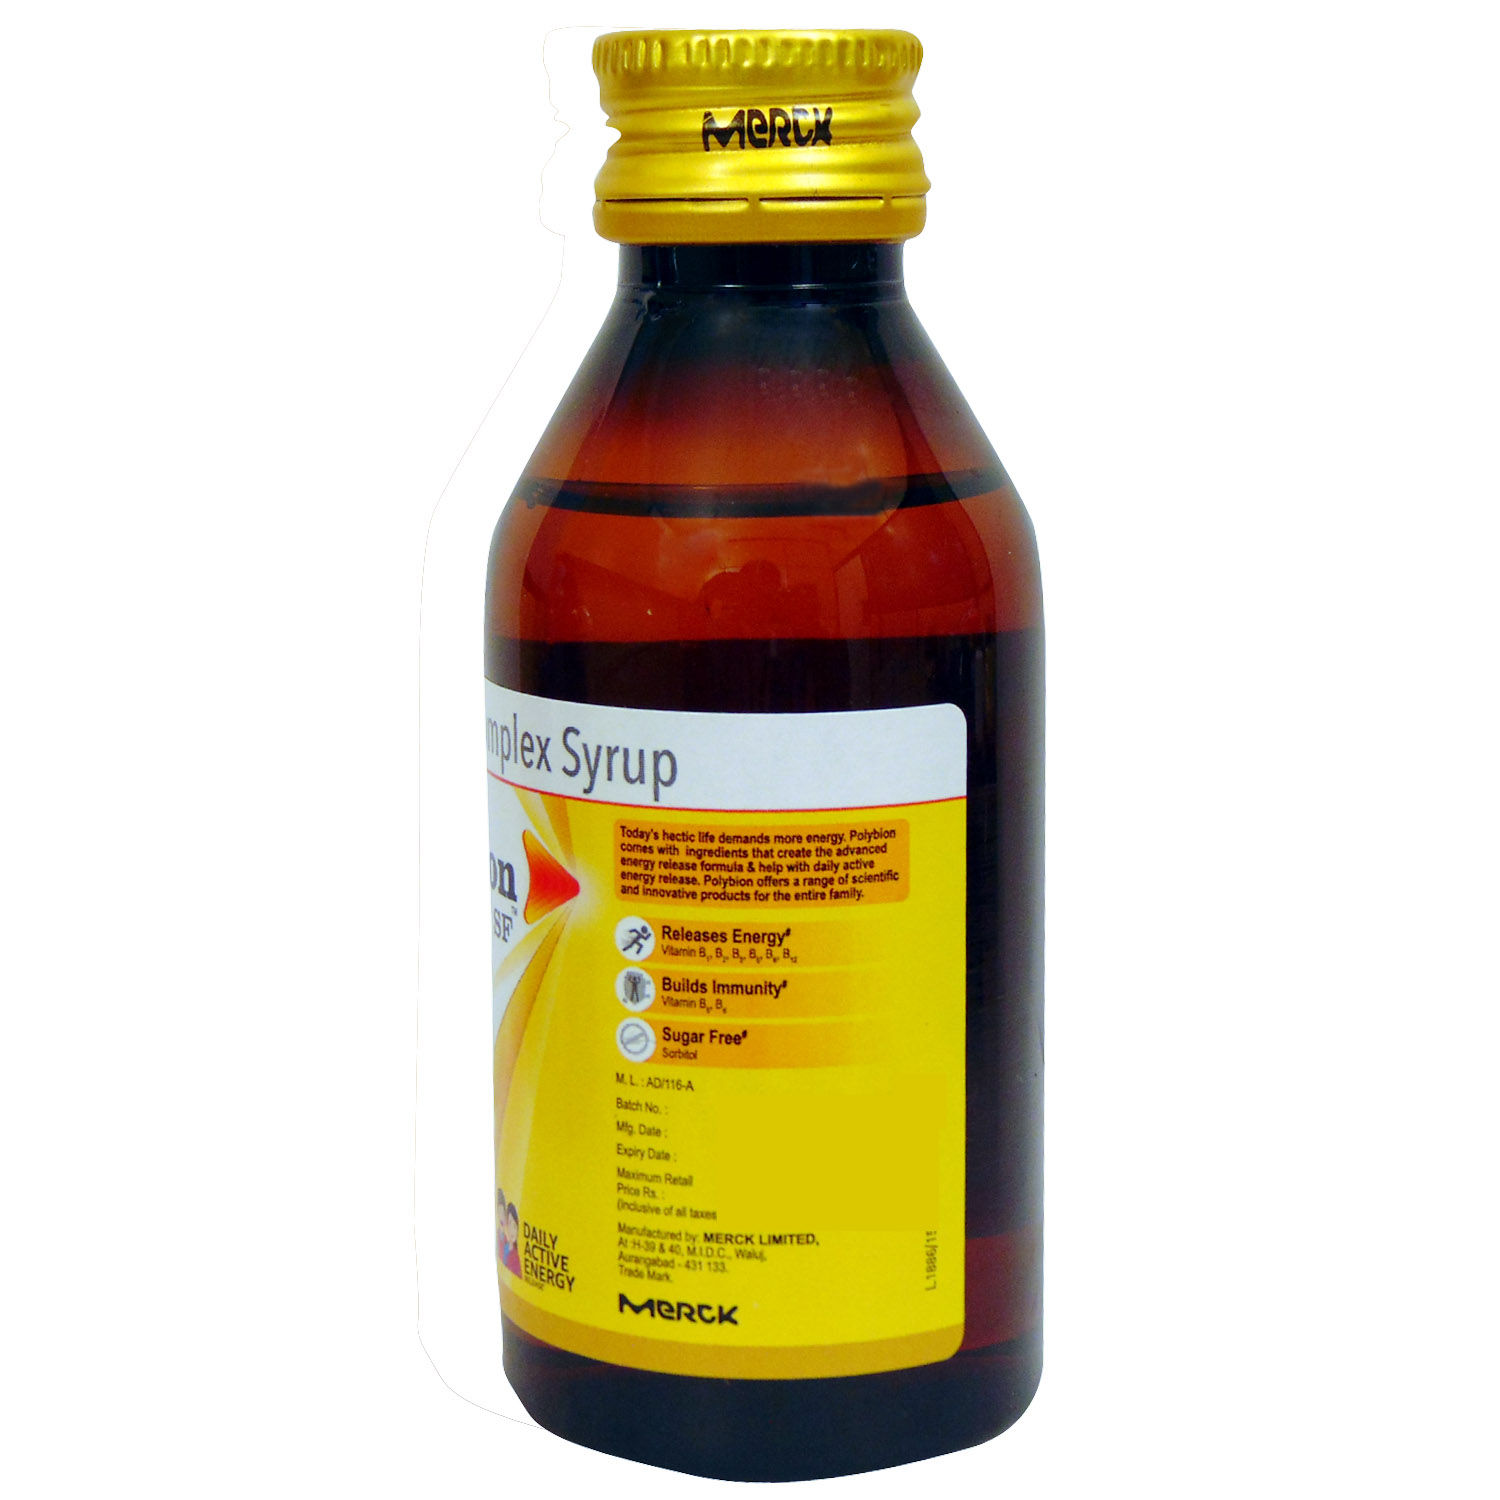 Polybion Syrup 100 ml, Pack of 1 SYRUP